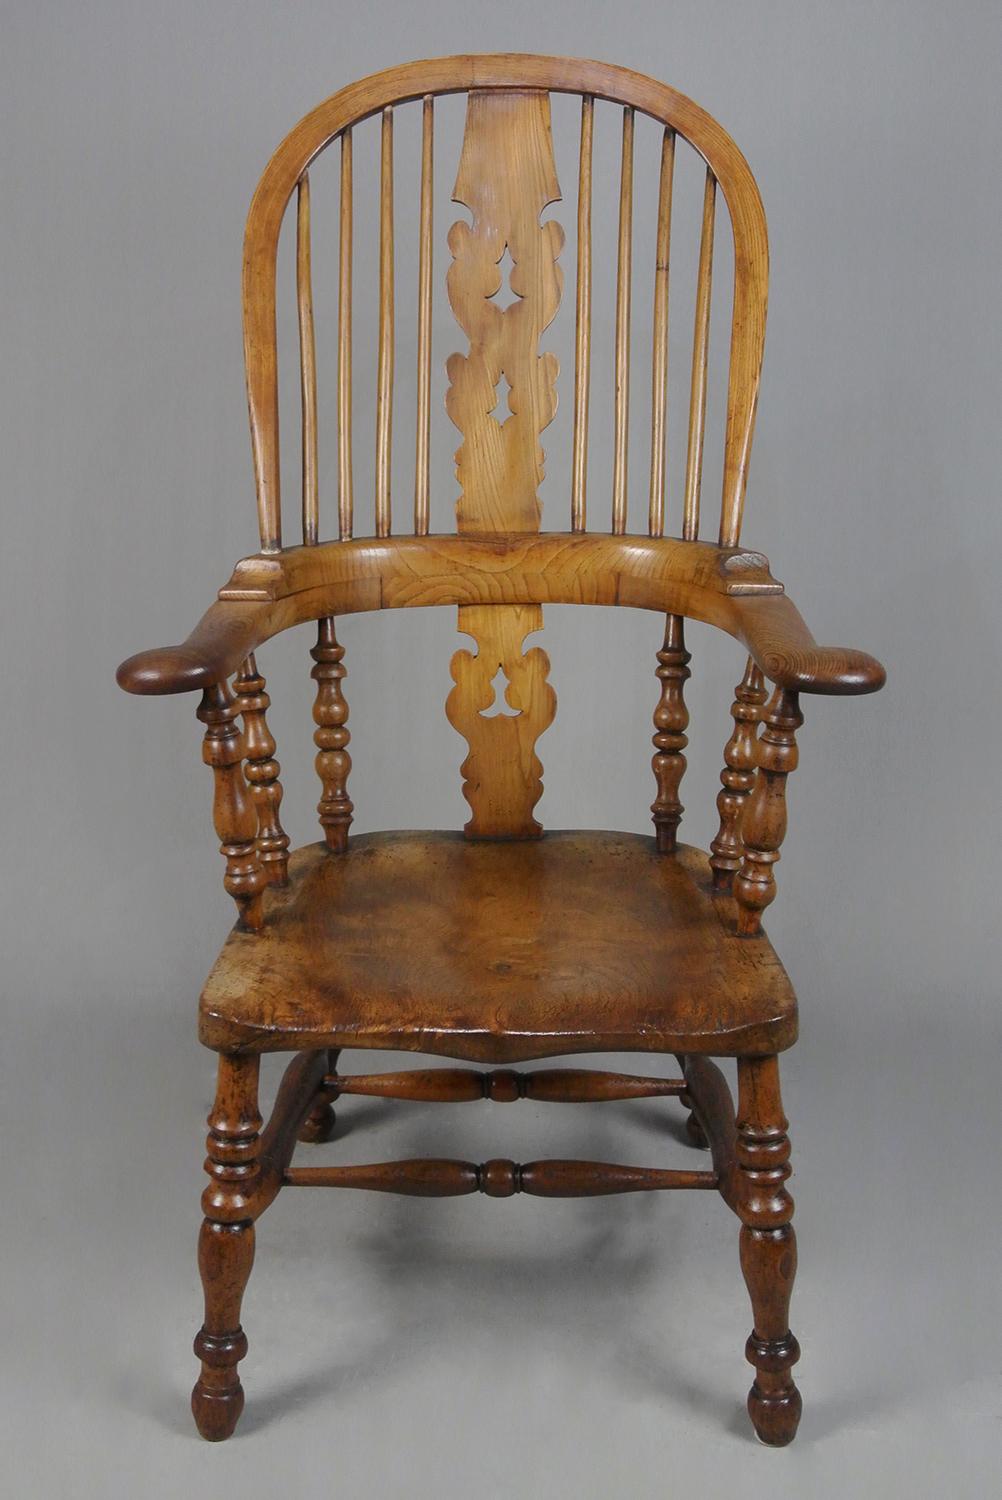 Rare 19th Century Yew, Elm and Ash Windsor Chair c. 1850 For Sale 1